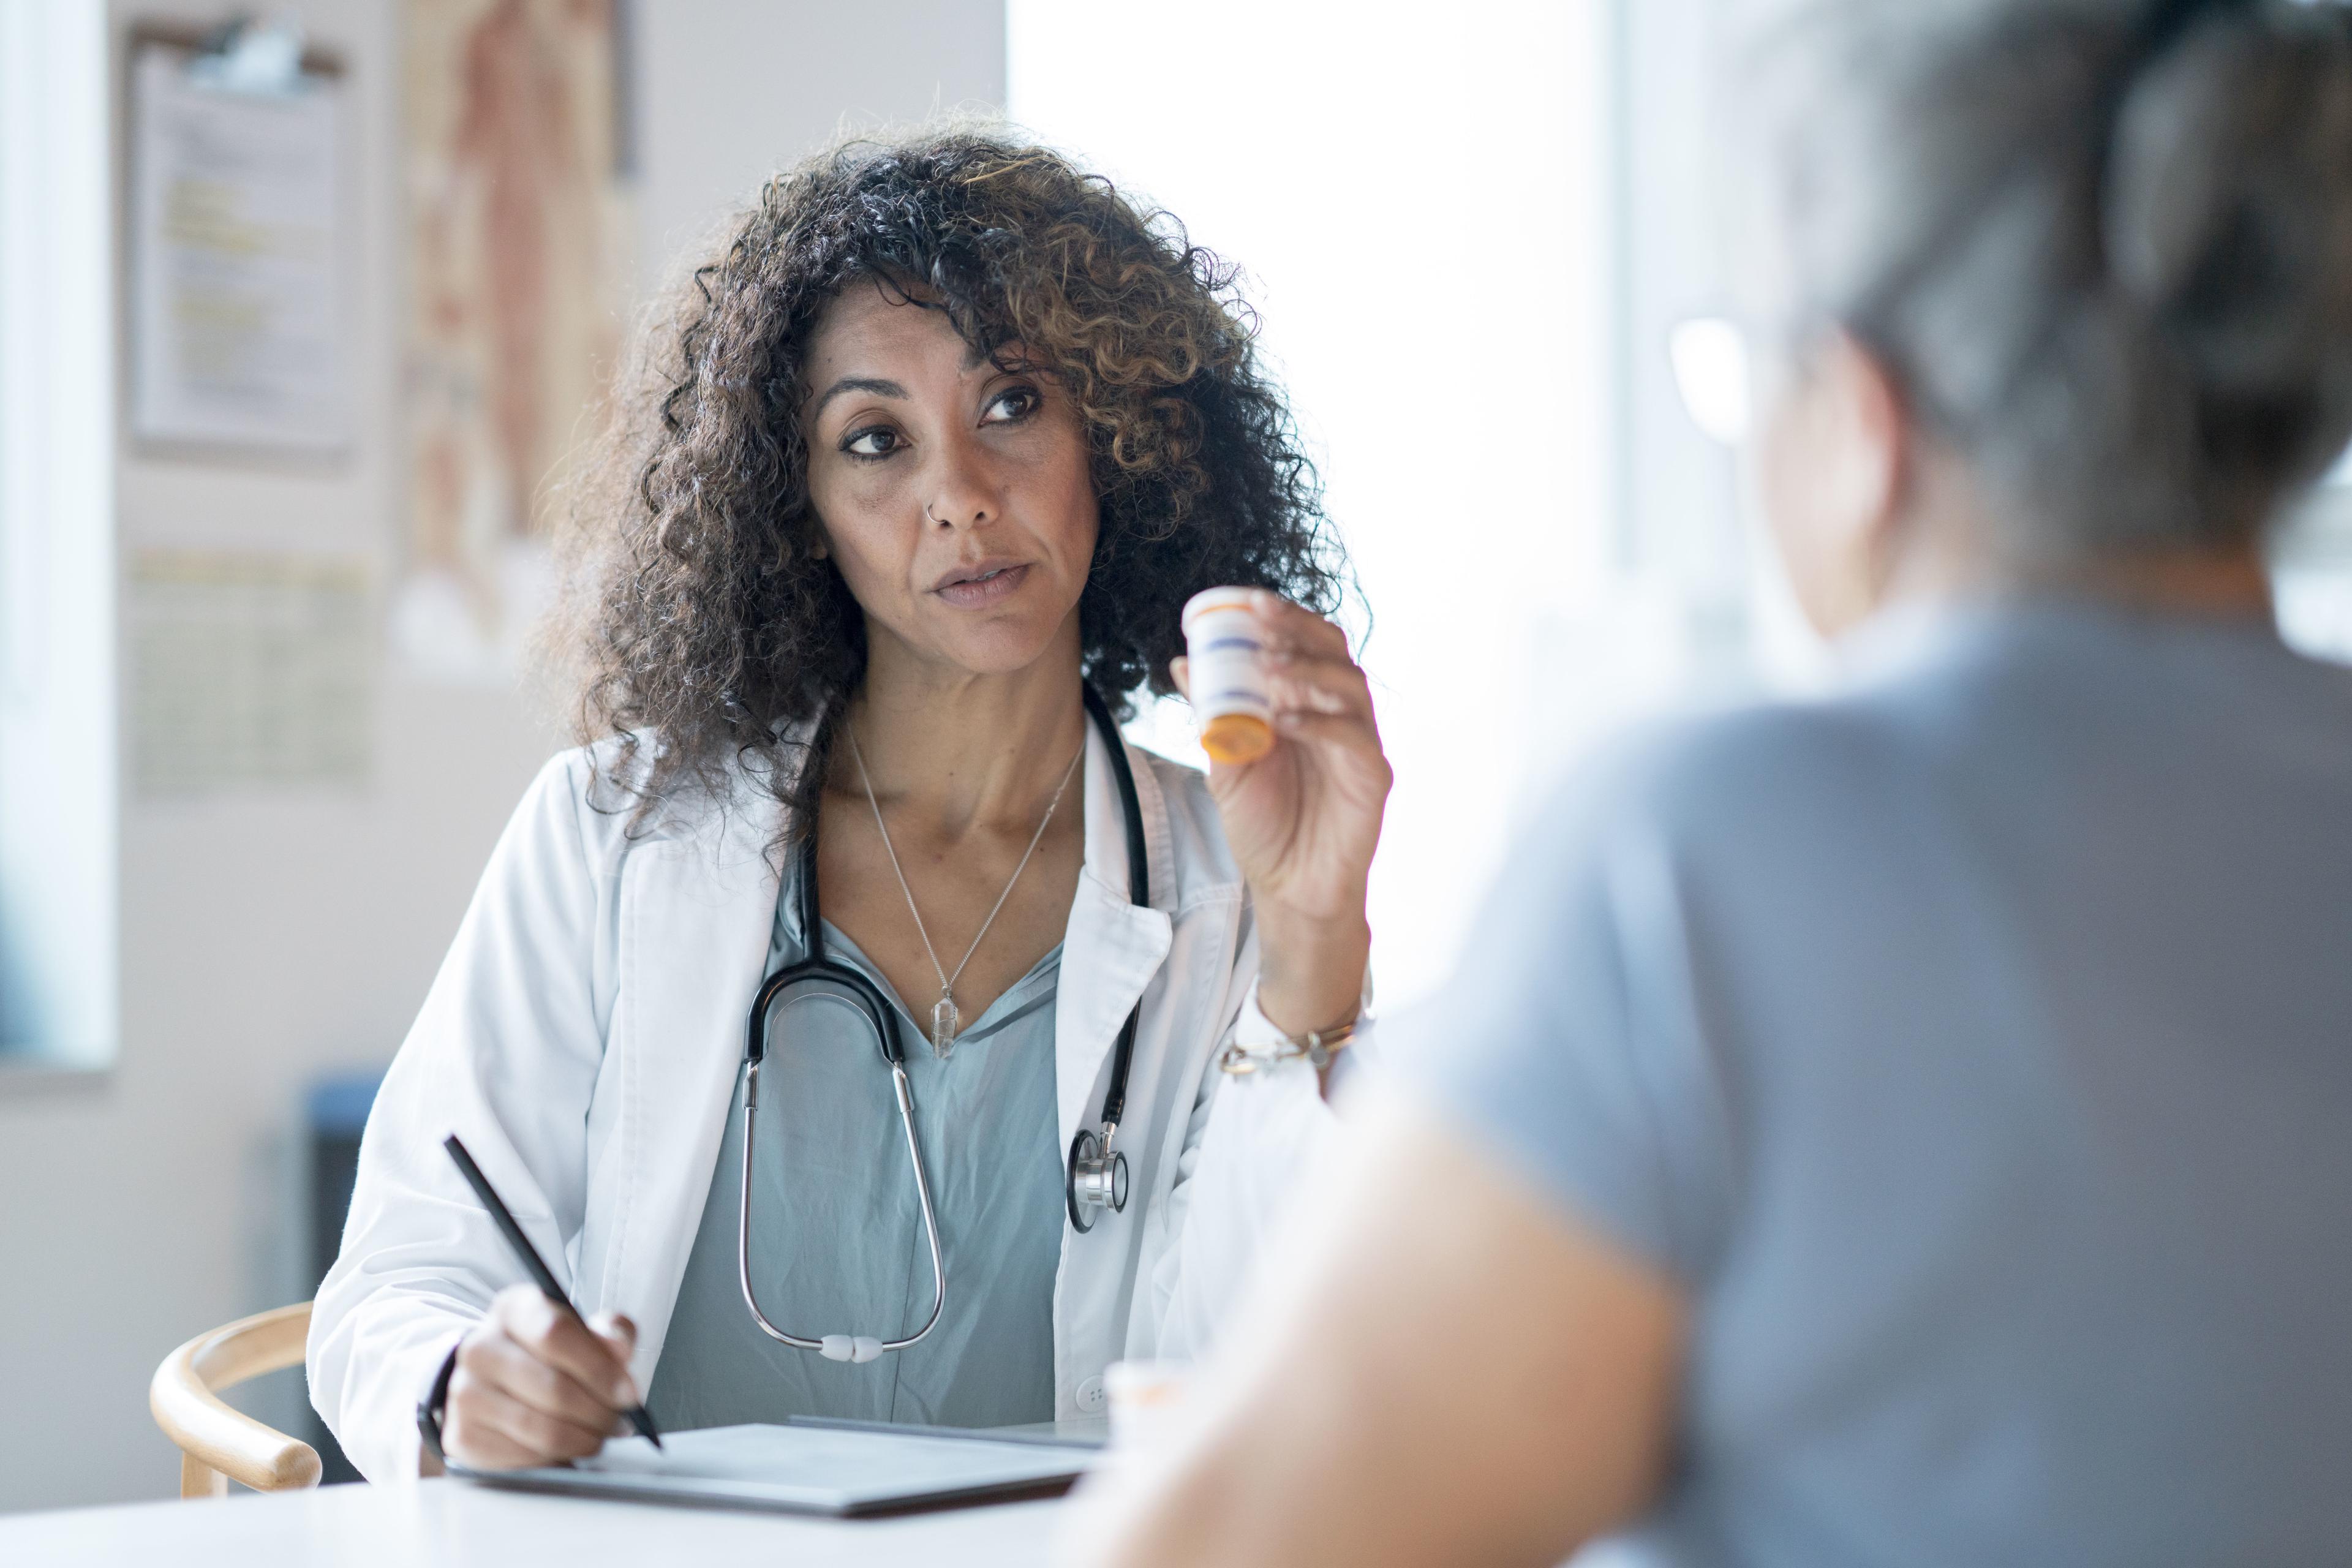 Can an fnp prescribe medication? a picture of an FNP listening to a patient.